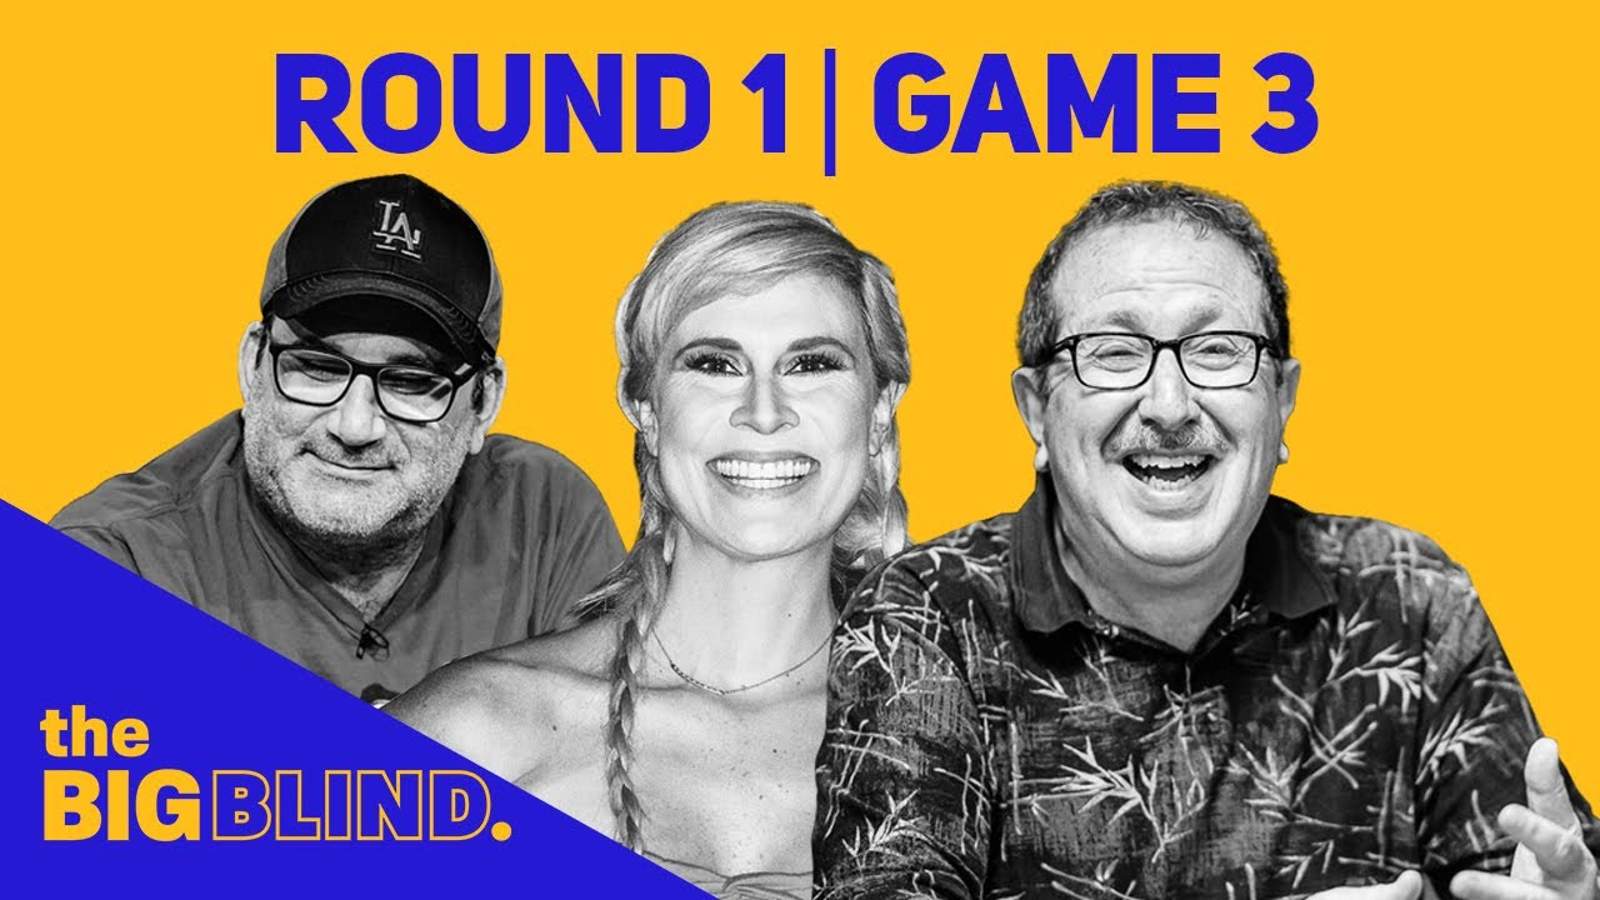 Rewatch Round 1 - Game 3 of The Big Blind on YouTube and Facebook